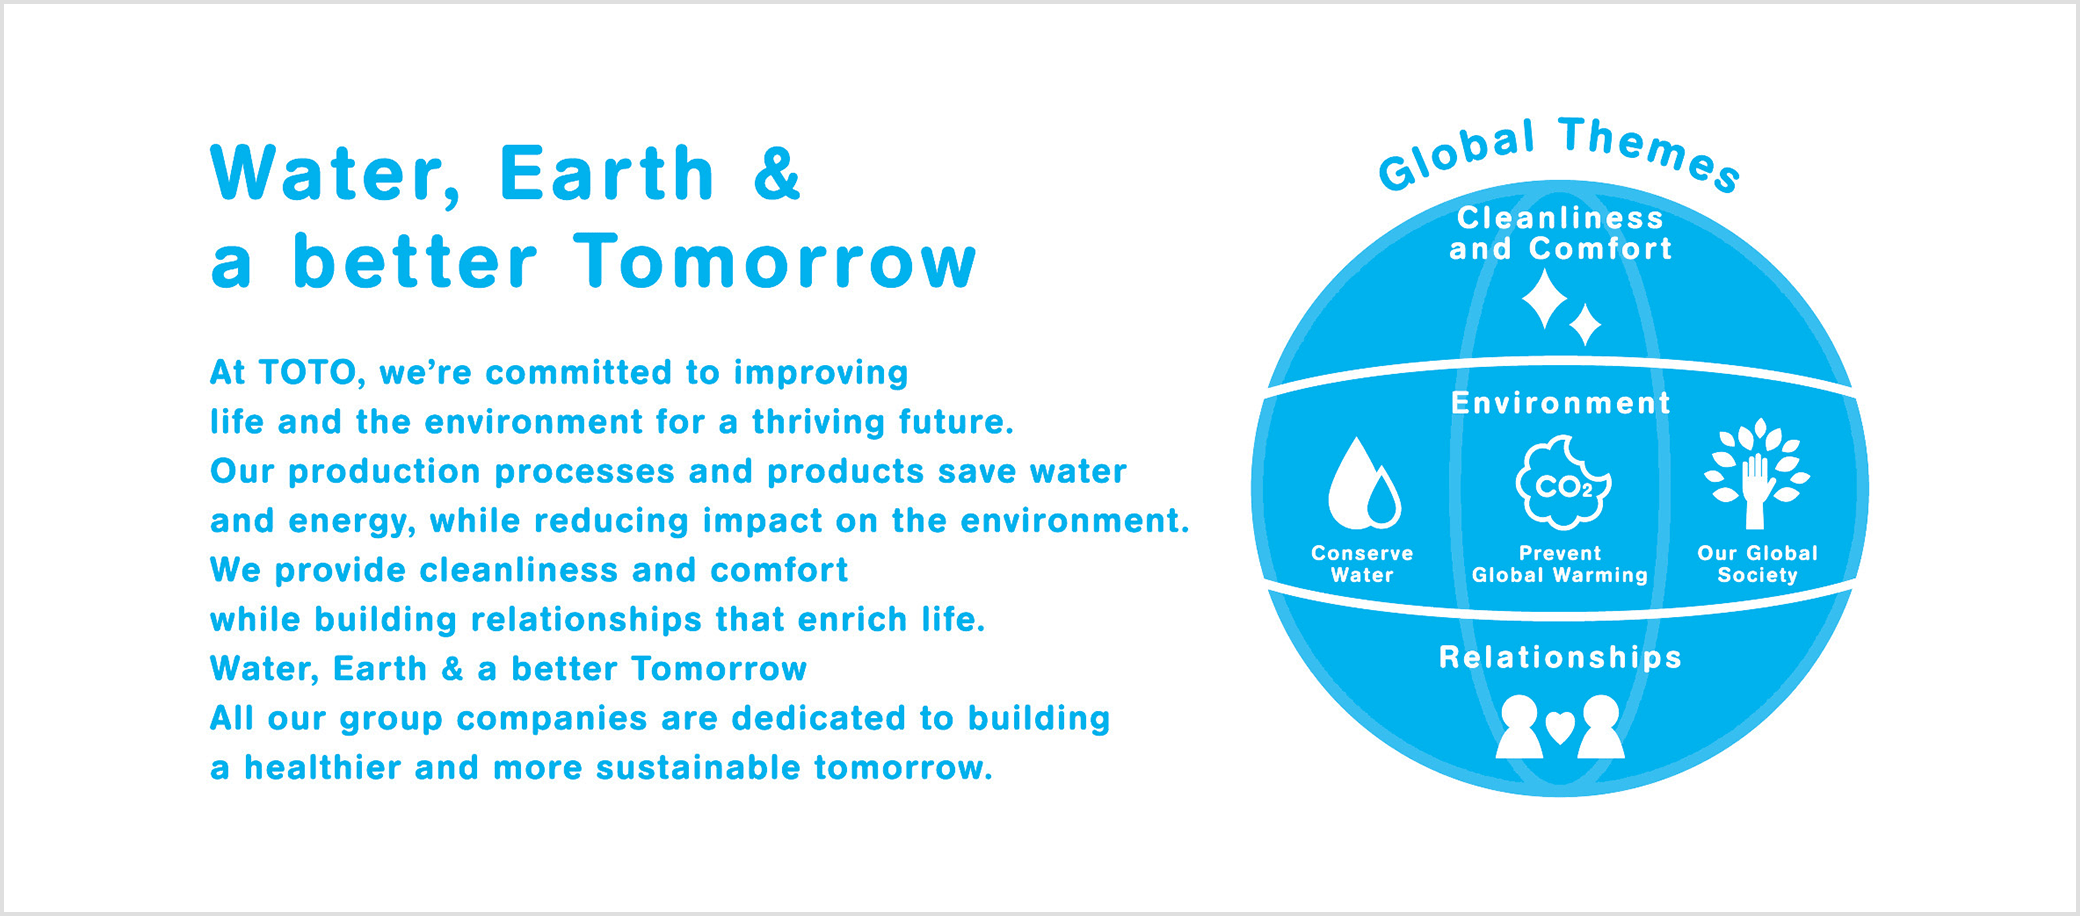 Water, Earth & a better Tomorrow  At TOTO, we're committed to improving life and the environment for a thriving future. Our production processes and products save water and energy, while reducing impact on the environment. We provide cleanliness and comfort while building relationships that enrich life. Water, Earth & a better Tomorrow All our group companies are dedicated to building a healthier and more sustainable tomorrow.